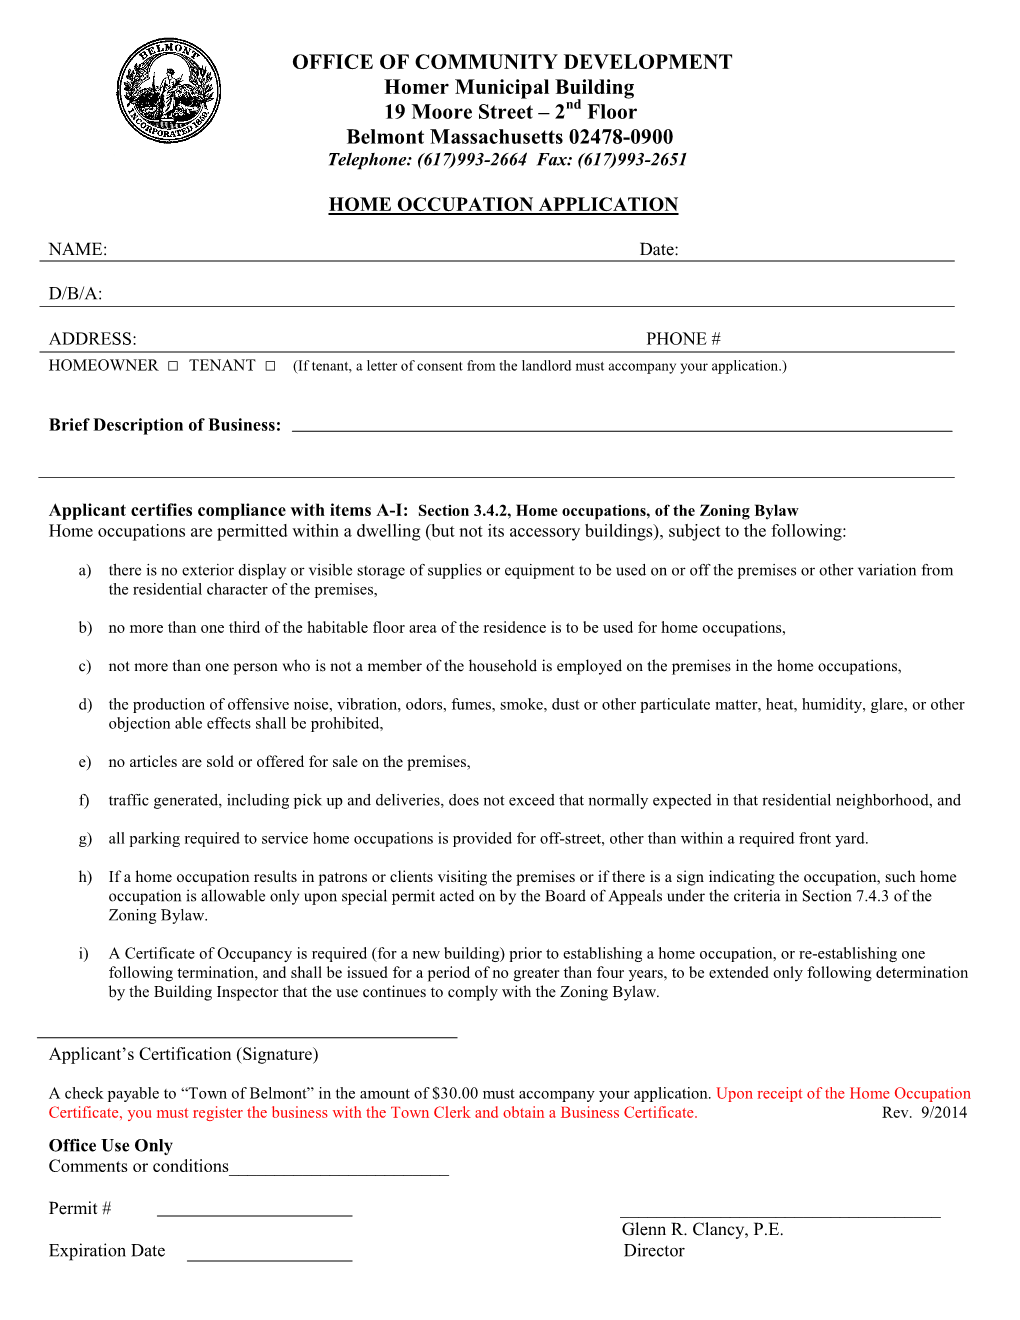 Home Occupation Application